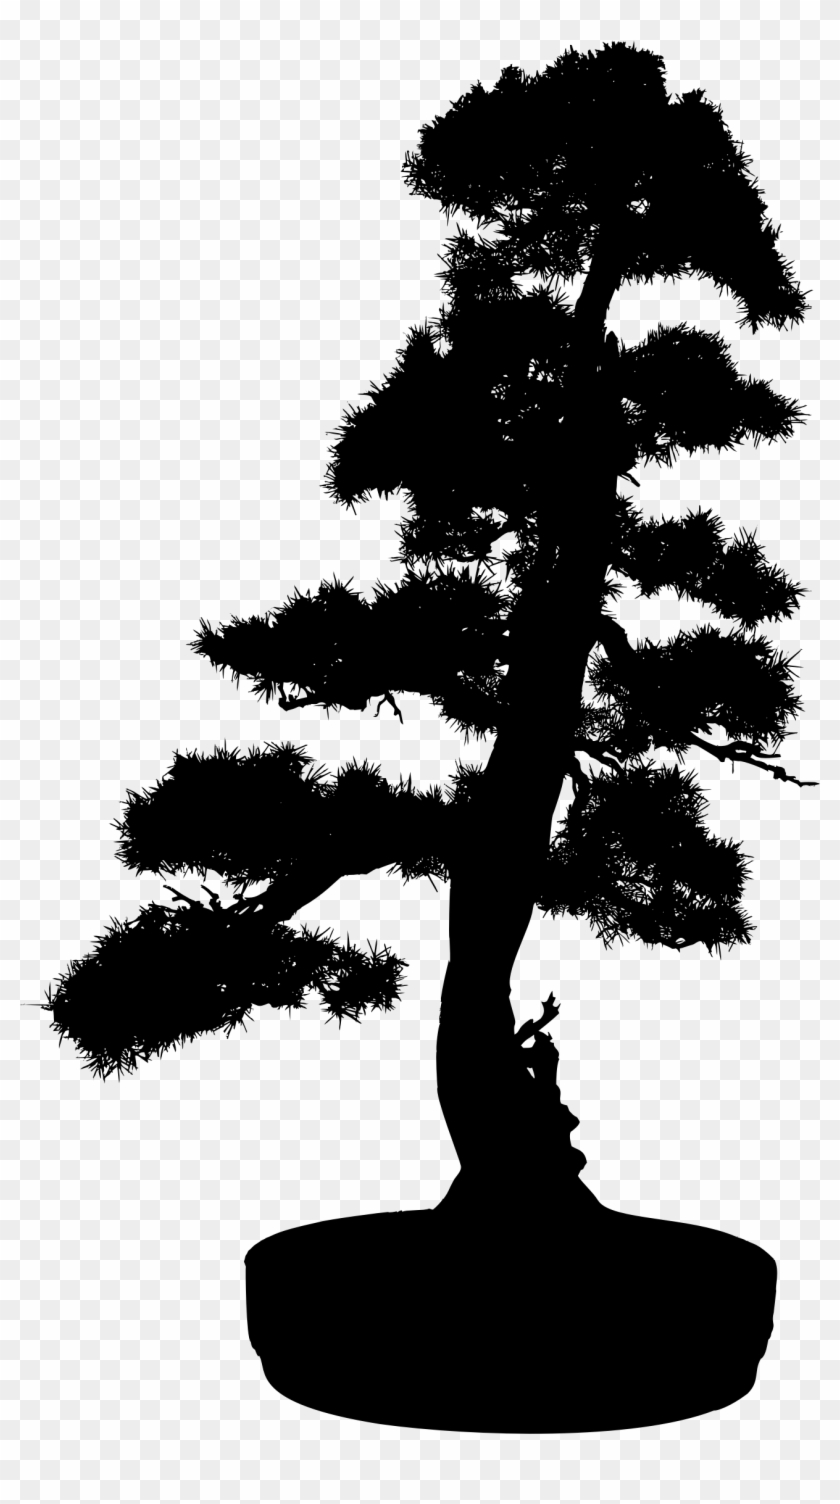 This Free Icons Png Design Of Bonsai Silhouette 2 - Bonsai Tree Silhouette Png Clipart #3377796